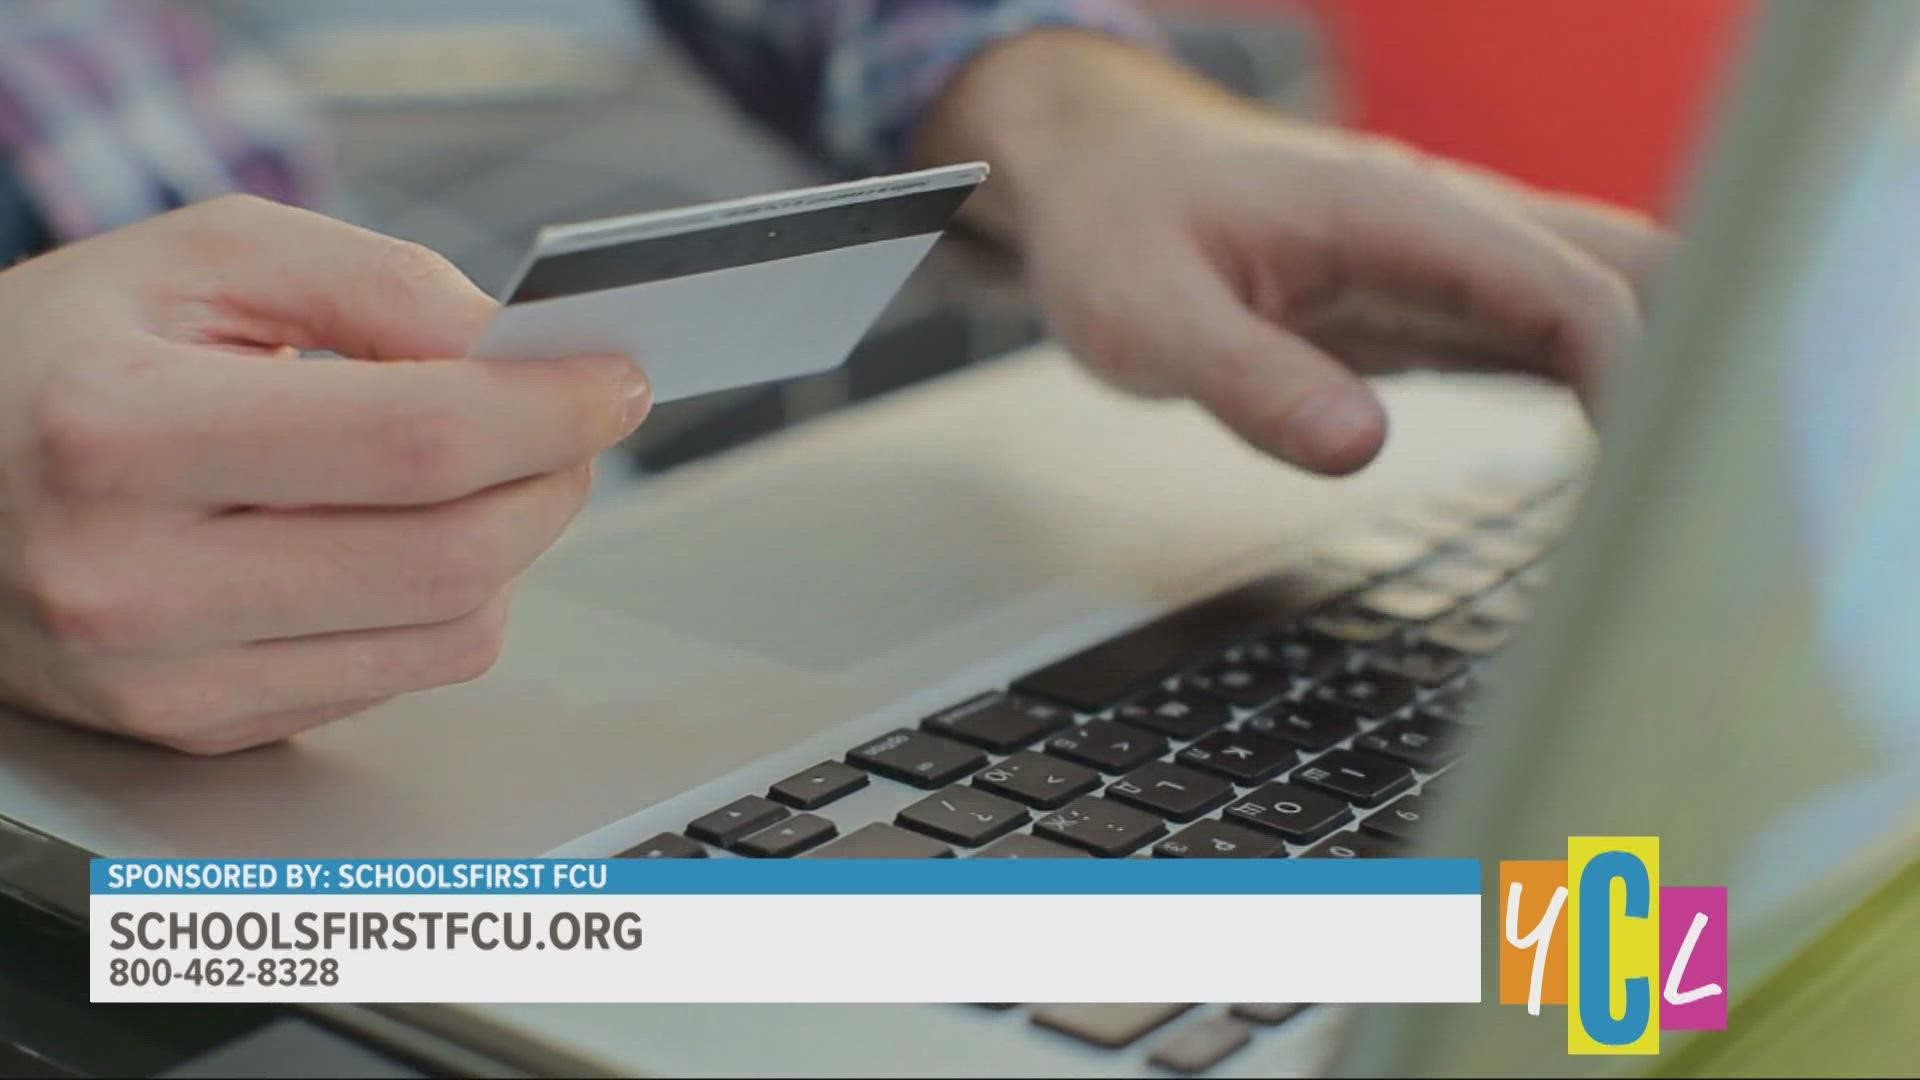 Learn safe credit card practices that can go a long way toward fraud prevention. This segment paid for by SchoolsFirst Federal Credit Union.